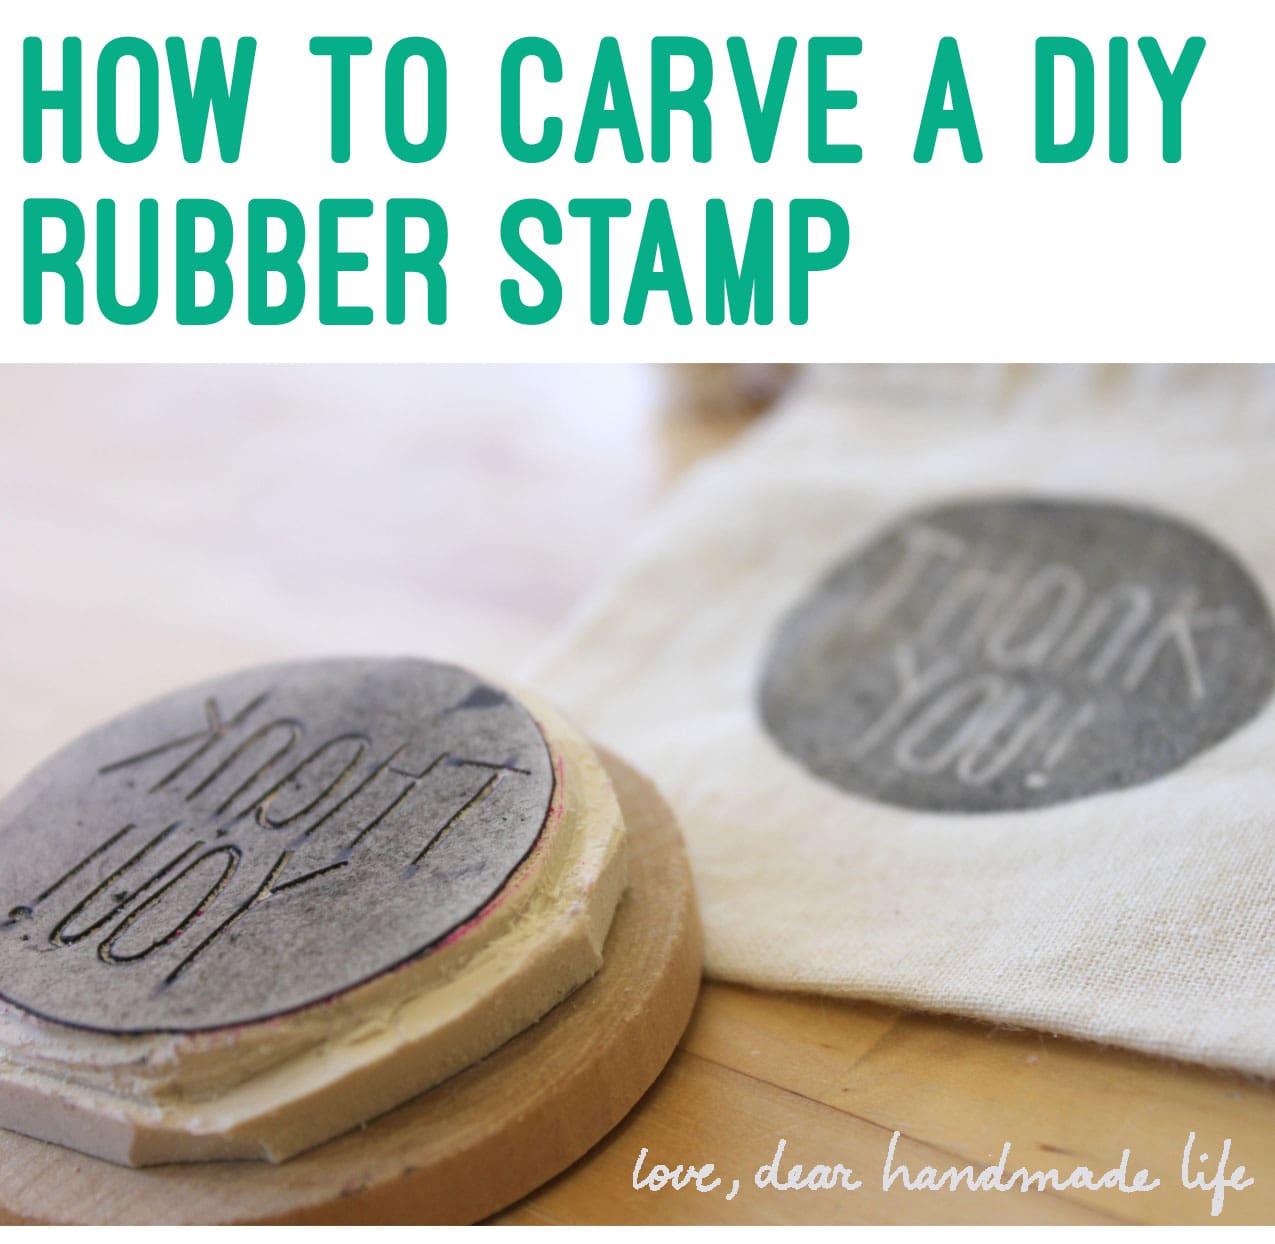 Blade Rubber Craft - the online store for the best rubber stamps